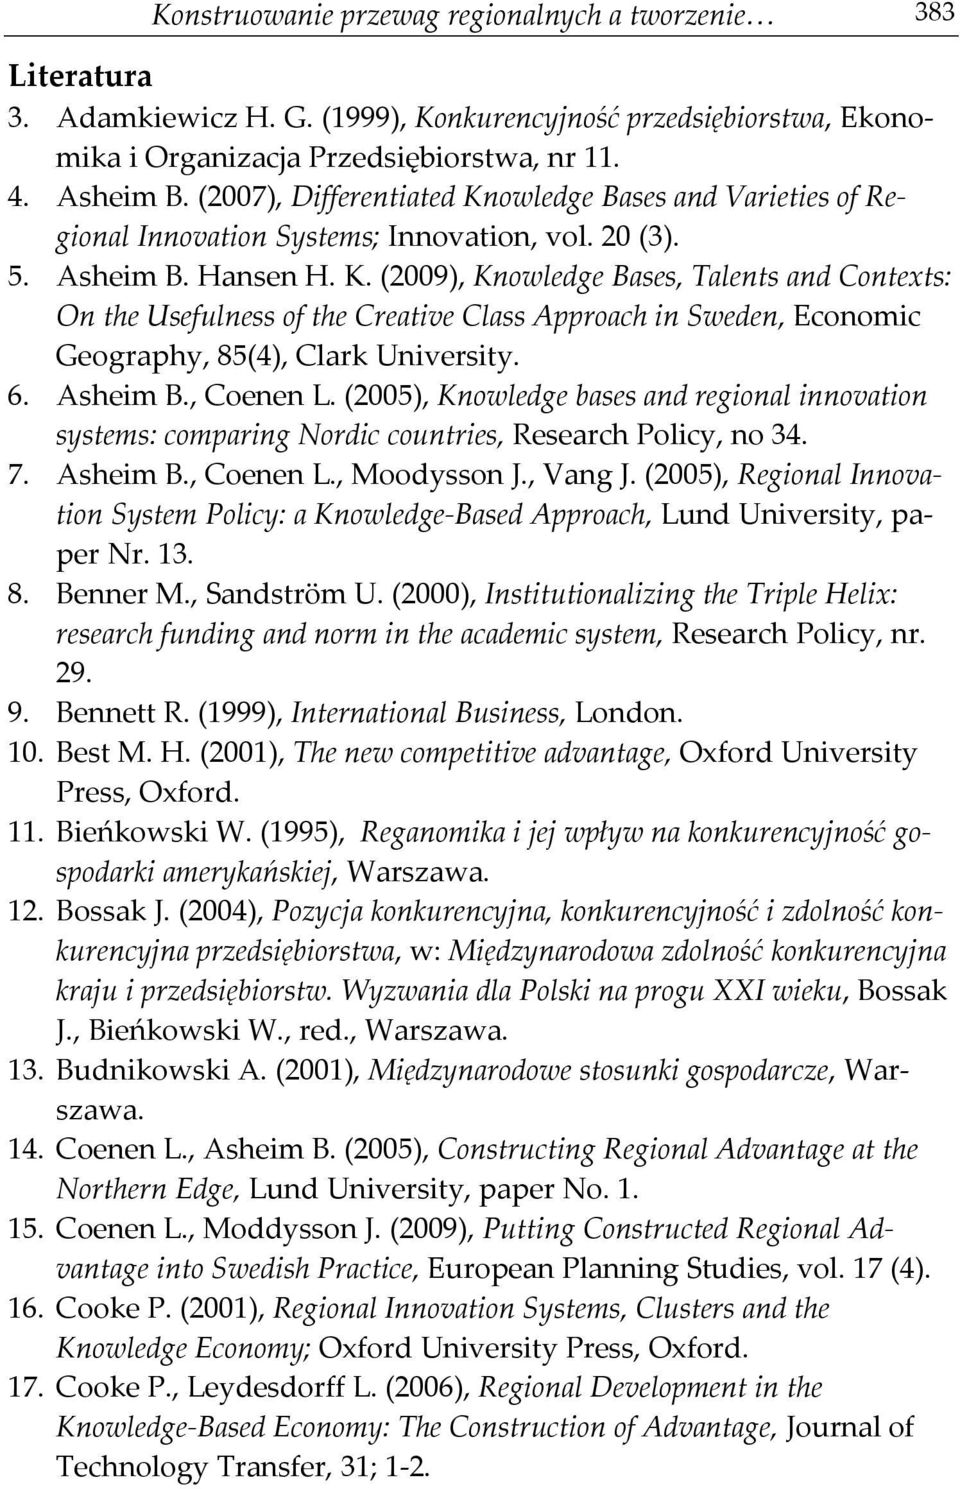 6. Asheim B., Coenen L. (2005), Knowledge bases and regional innovation systems: comparing Nordic countries, Research Policy, no 34. 7. Asheim B., Coenen L., Moodysson J., Vang J.